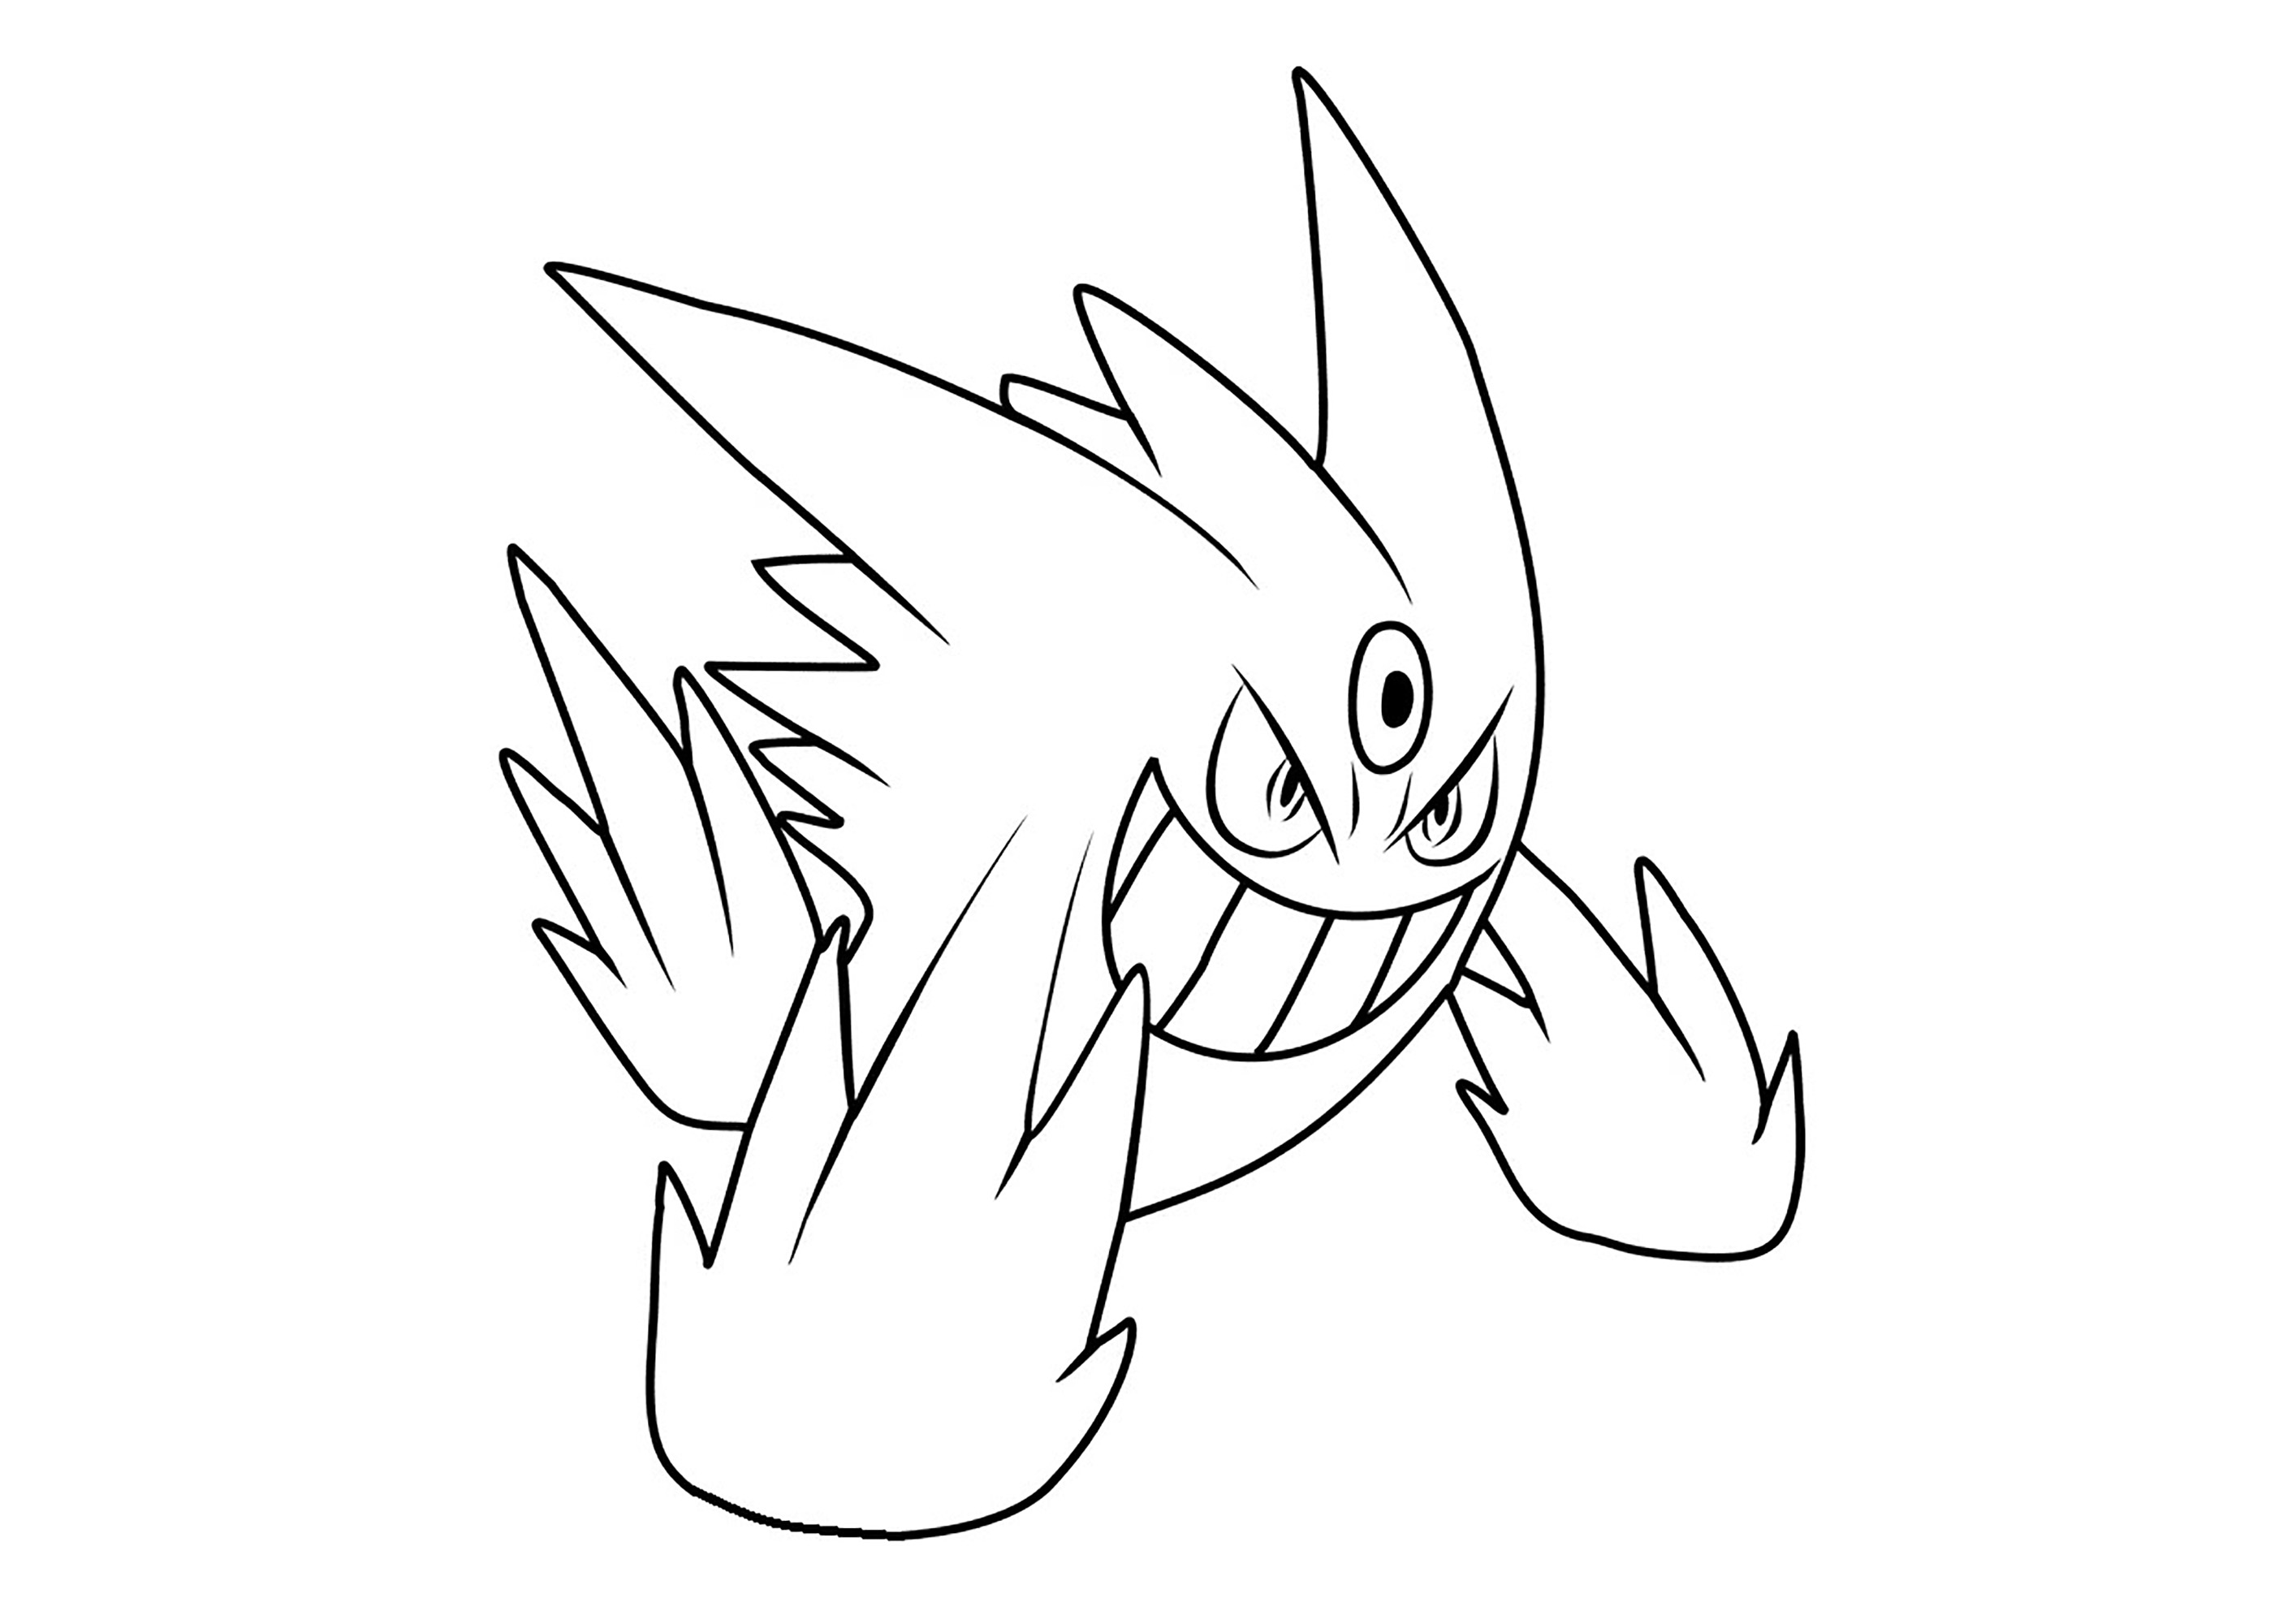 Gengar coloring page for kids